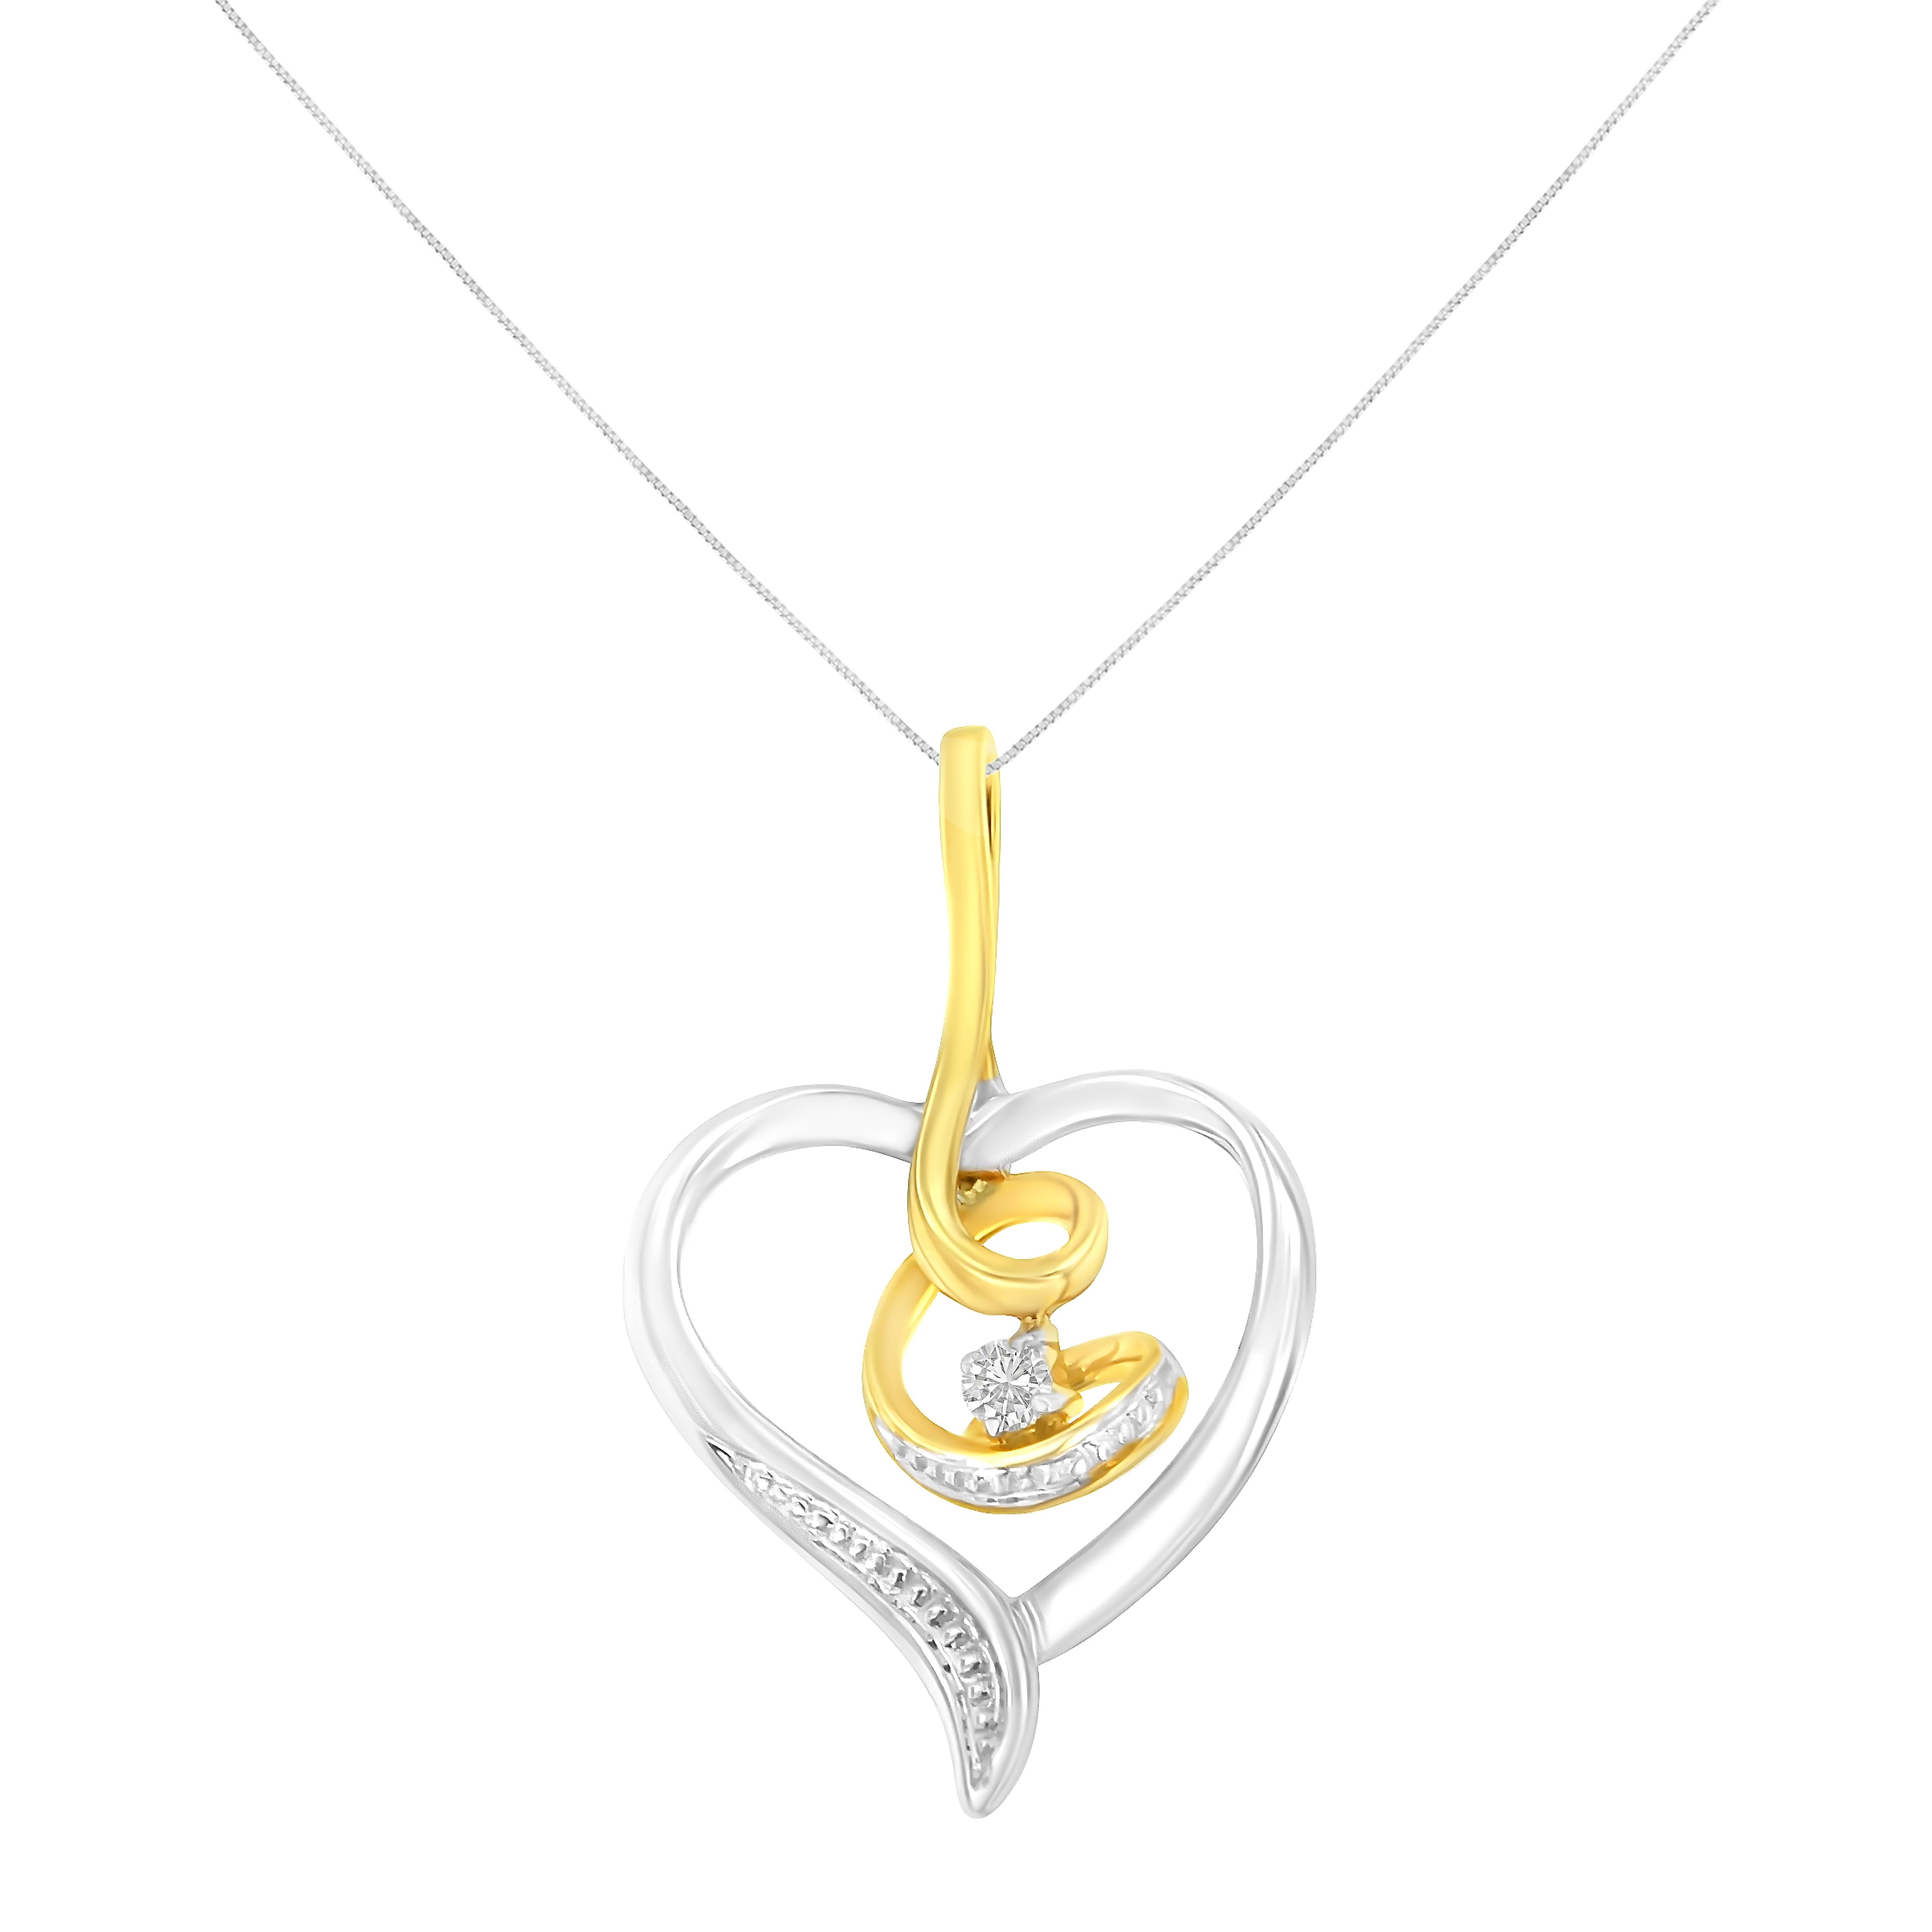 Symbolizing a love that never ends, this impeccably designed real 10kt gold heart pendant swirls at the center and sparkles with a scattering of diamonds. This necklace makes a perfect Valentine's Day gift, or as a novel twist on a promise ring;